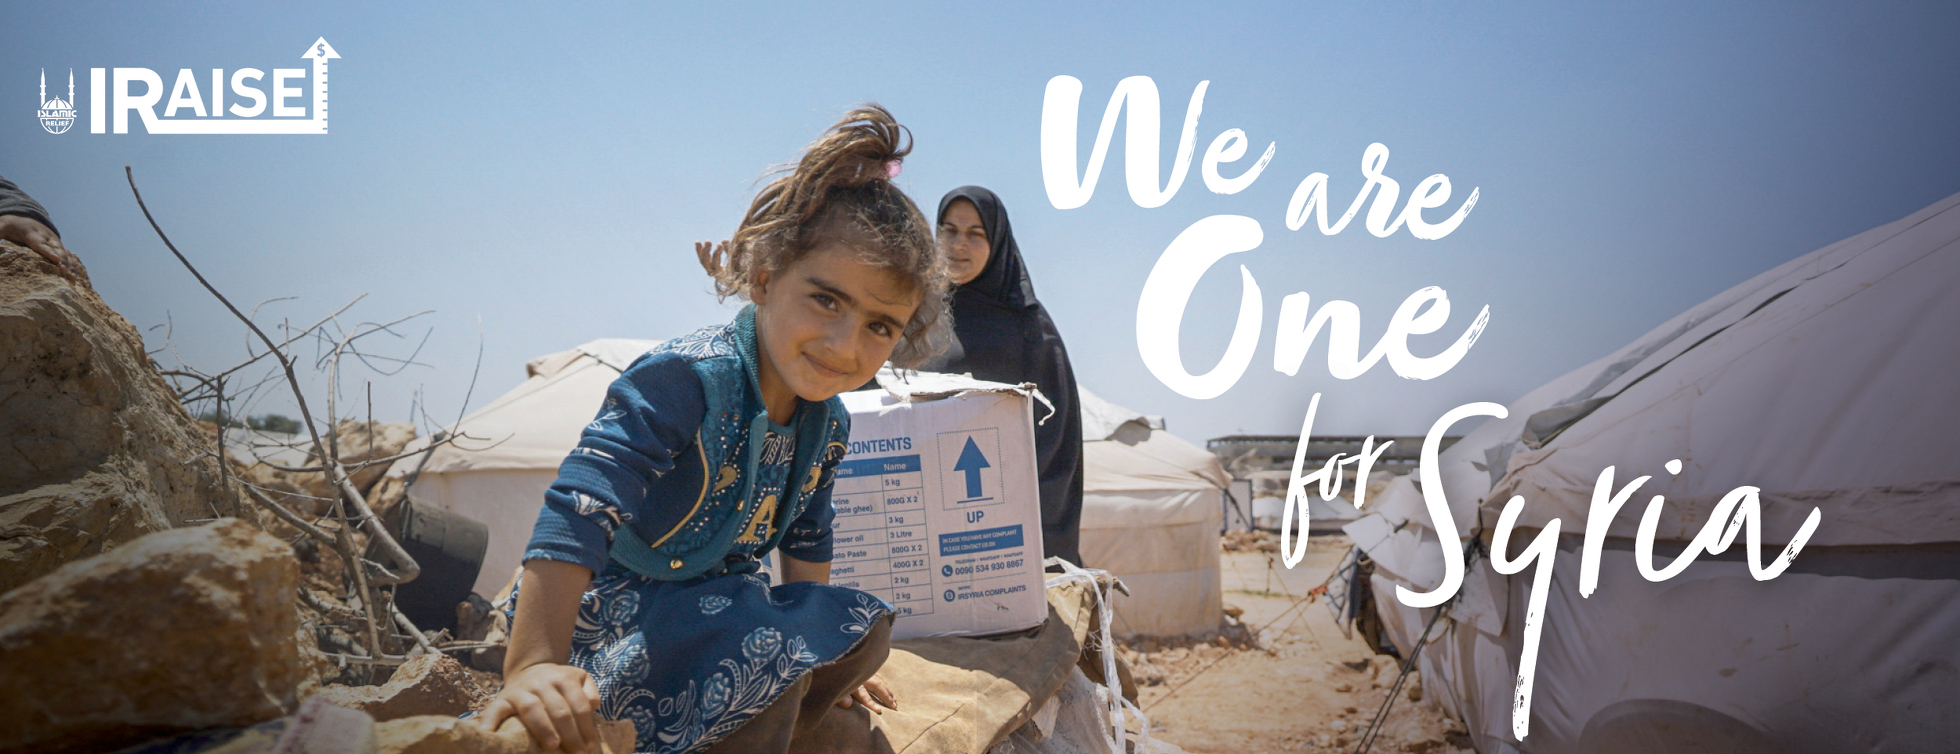 We are One for Syria 